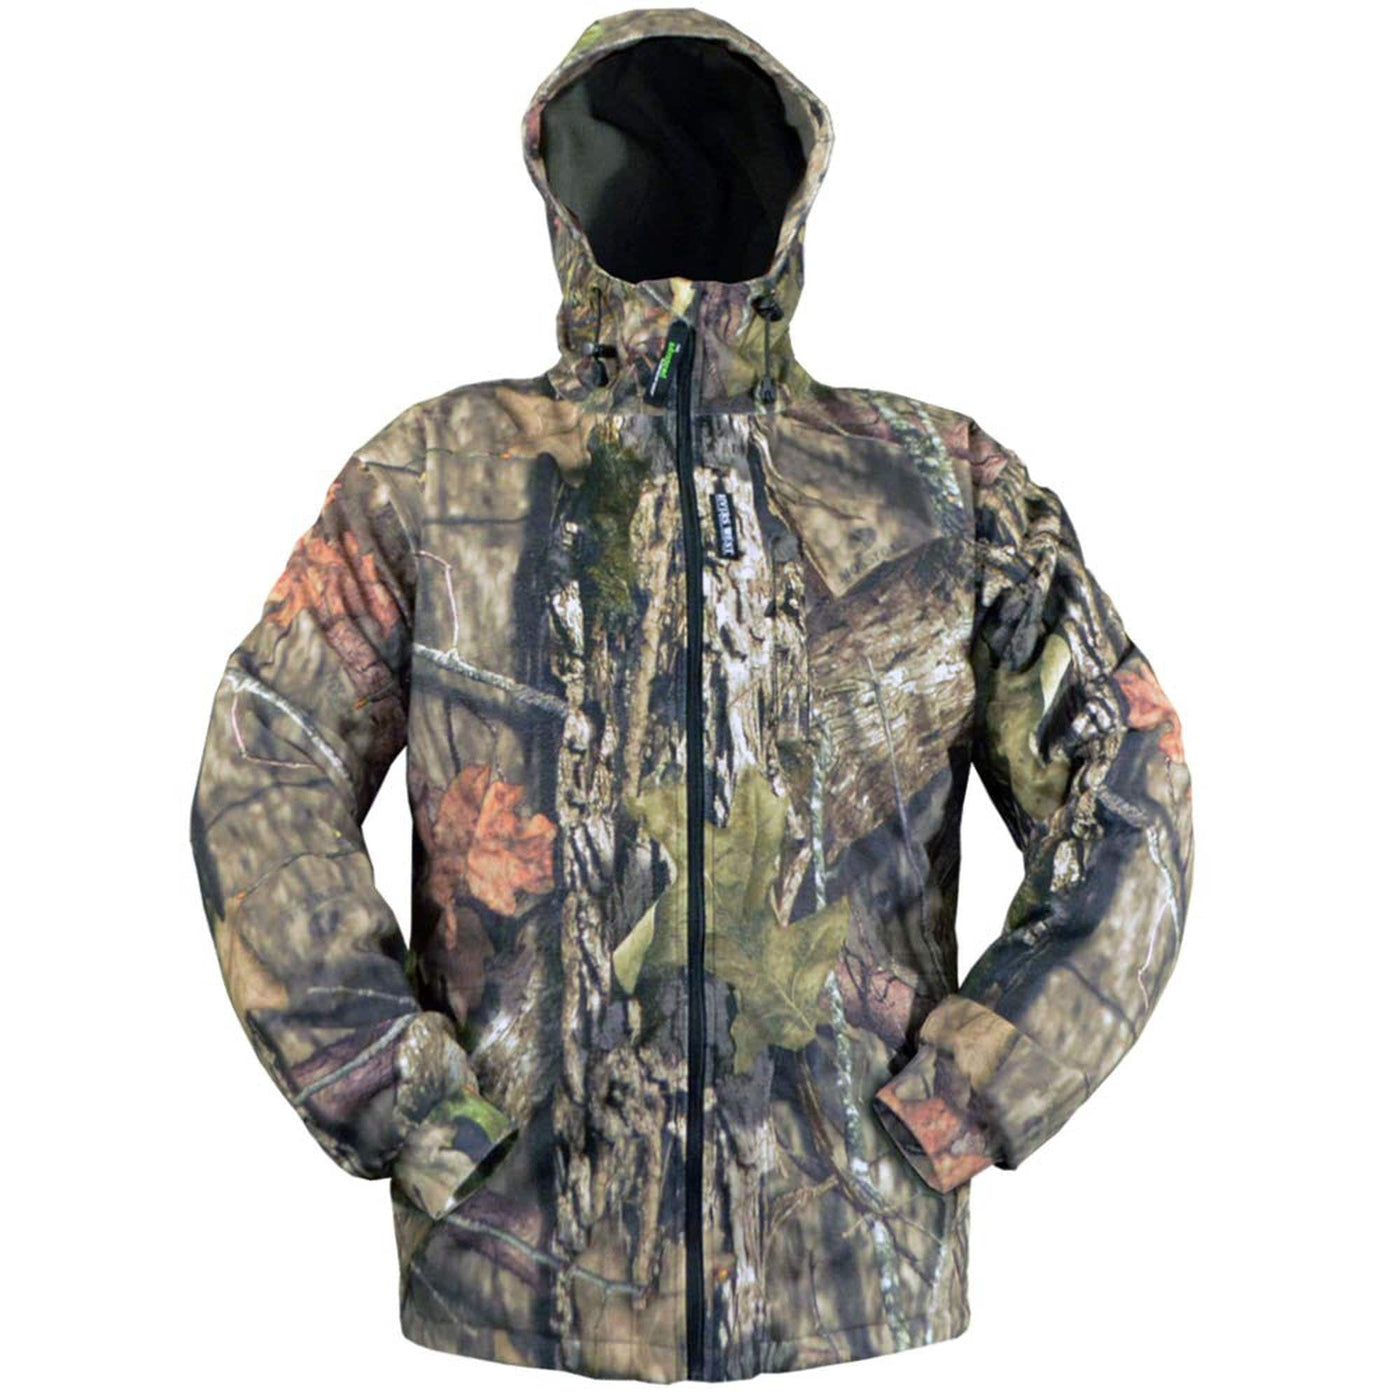 Rivers West Rivers West Adirondack Jacket Realtree Edge / X-Large Other